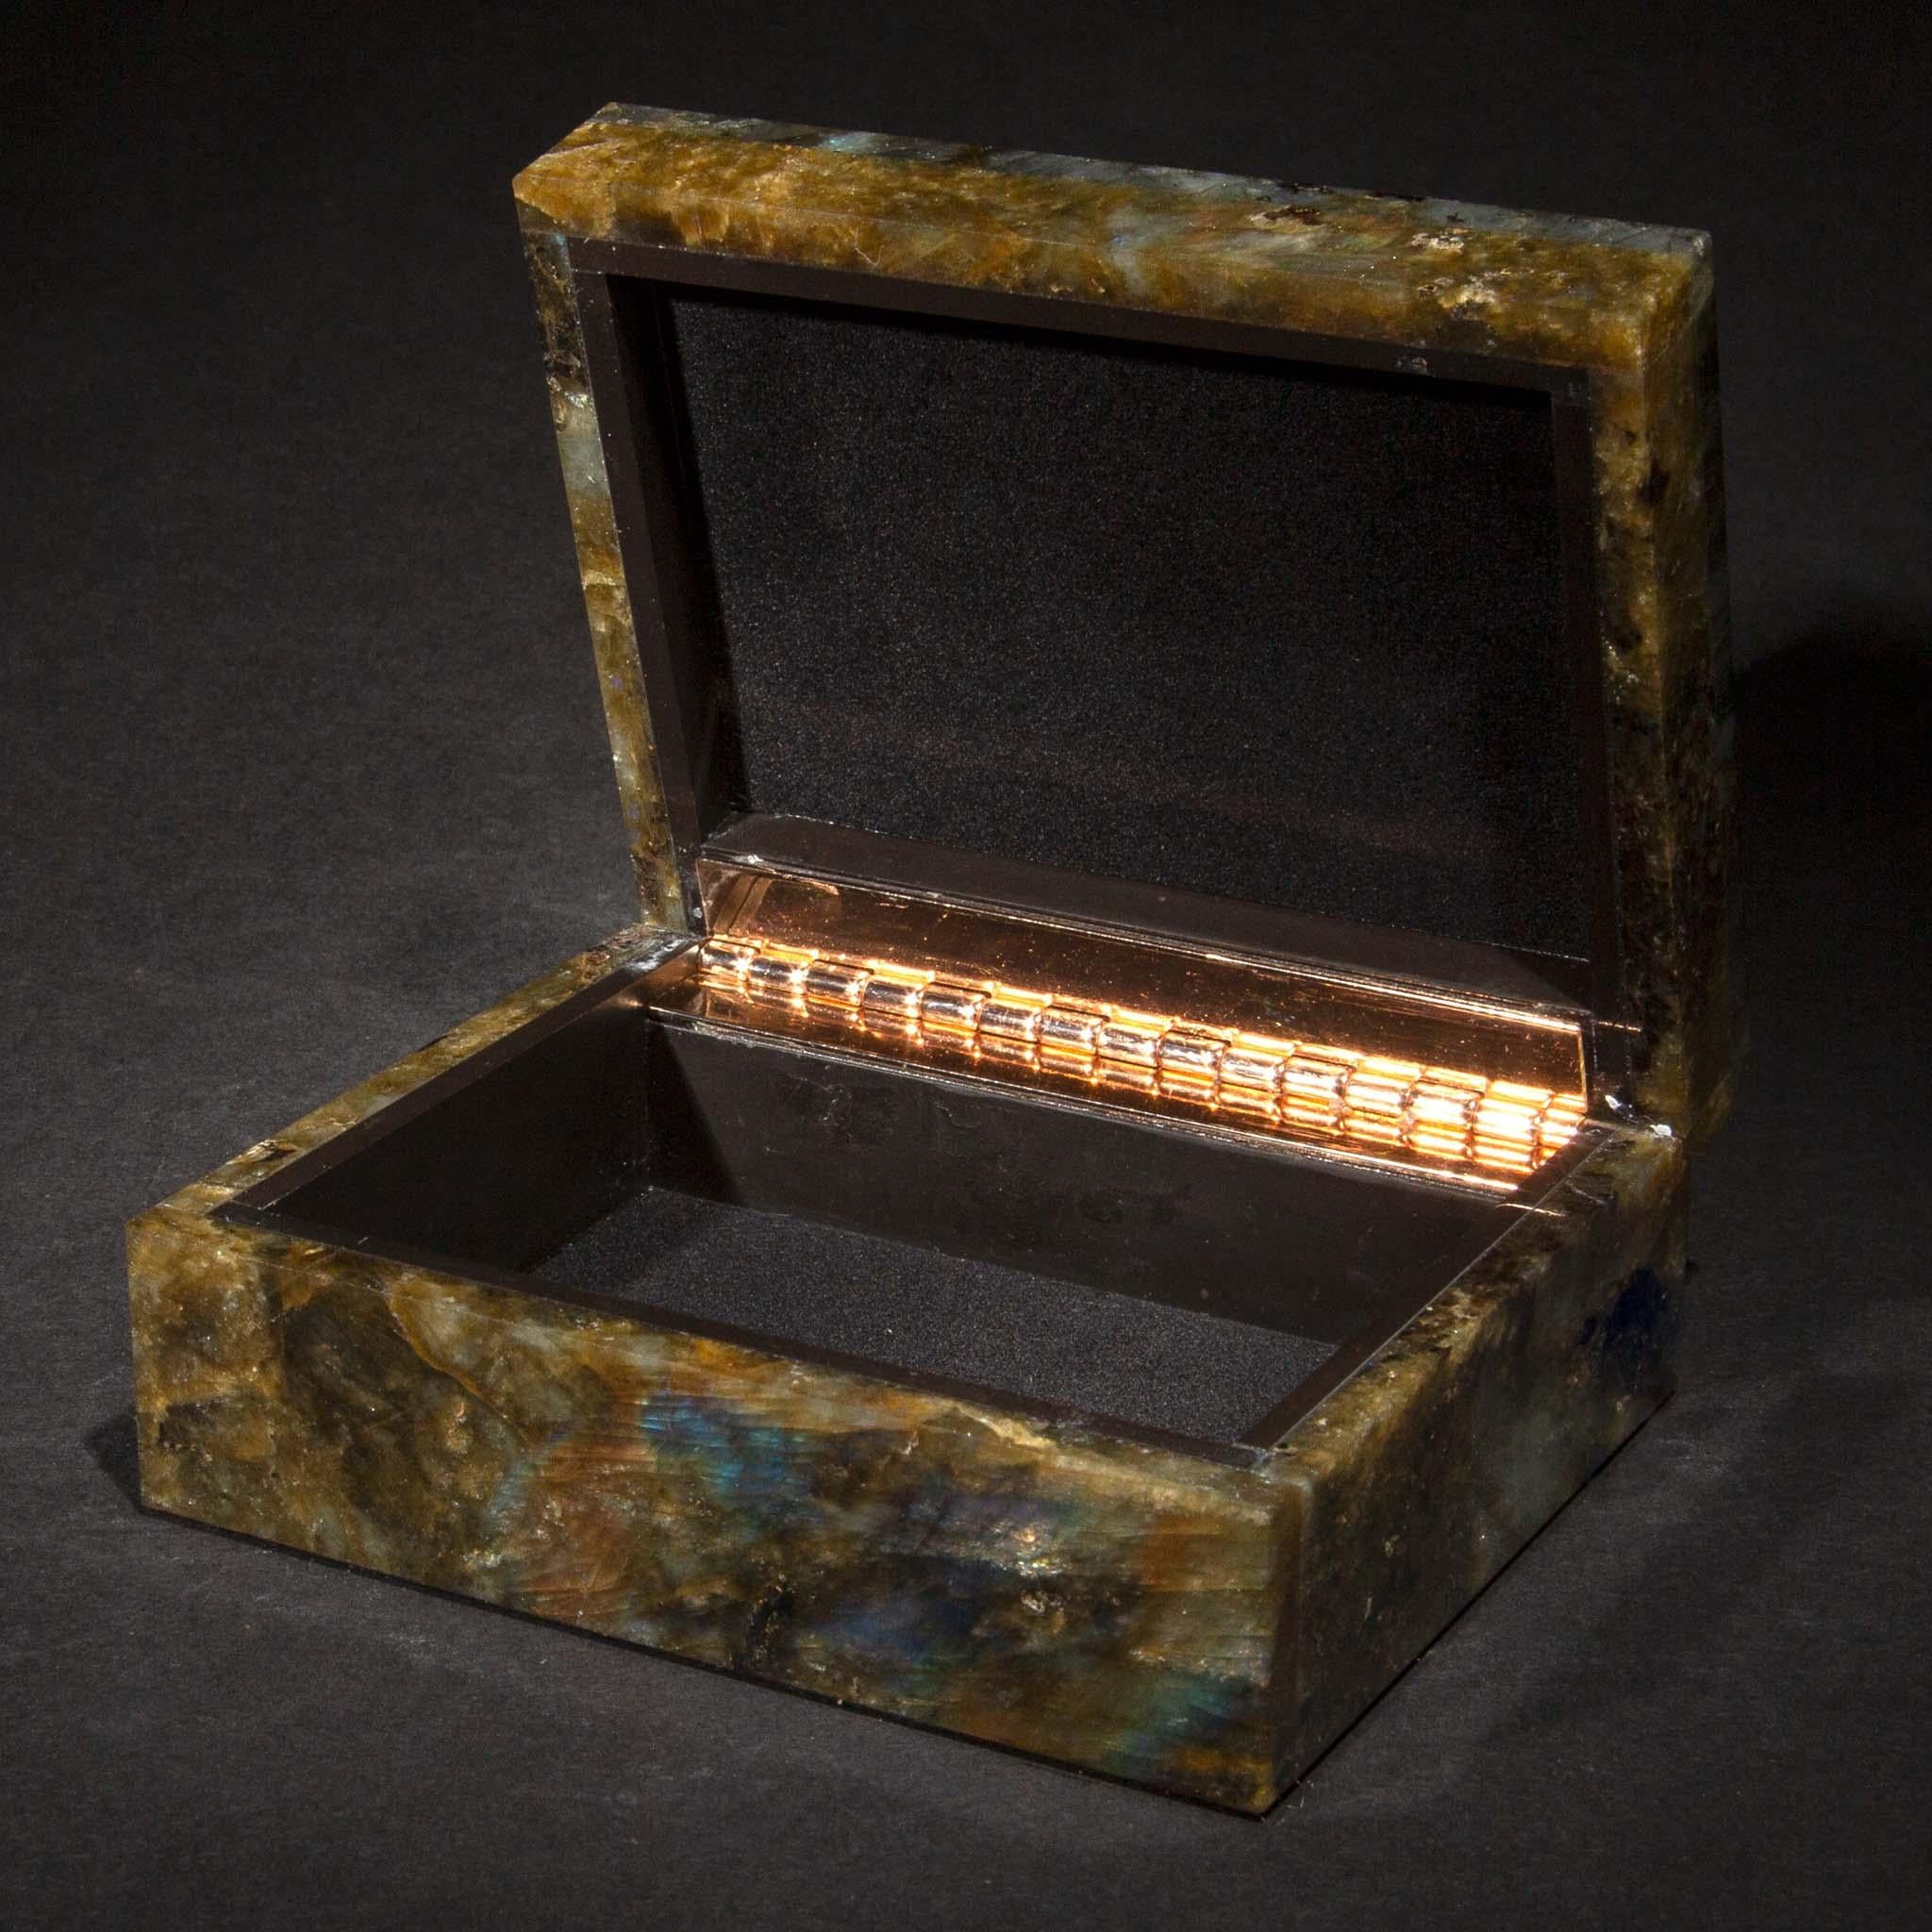 This Labradorite Box, with dimensions of 4.25 inches by 3.5 inches and a height of 1.75 inches, is a stunning piece that marries utility with the mesmerizing beauty of labradorite. Known for its captivating play of colors, labradorite displays a